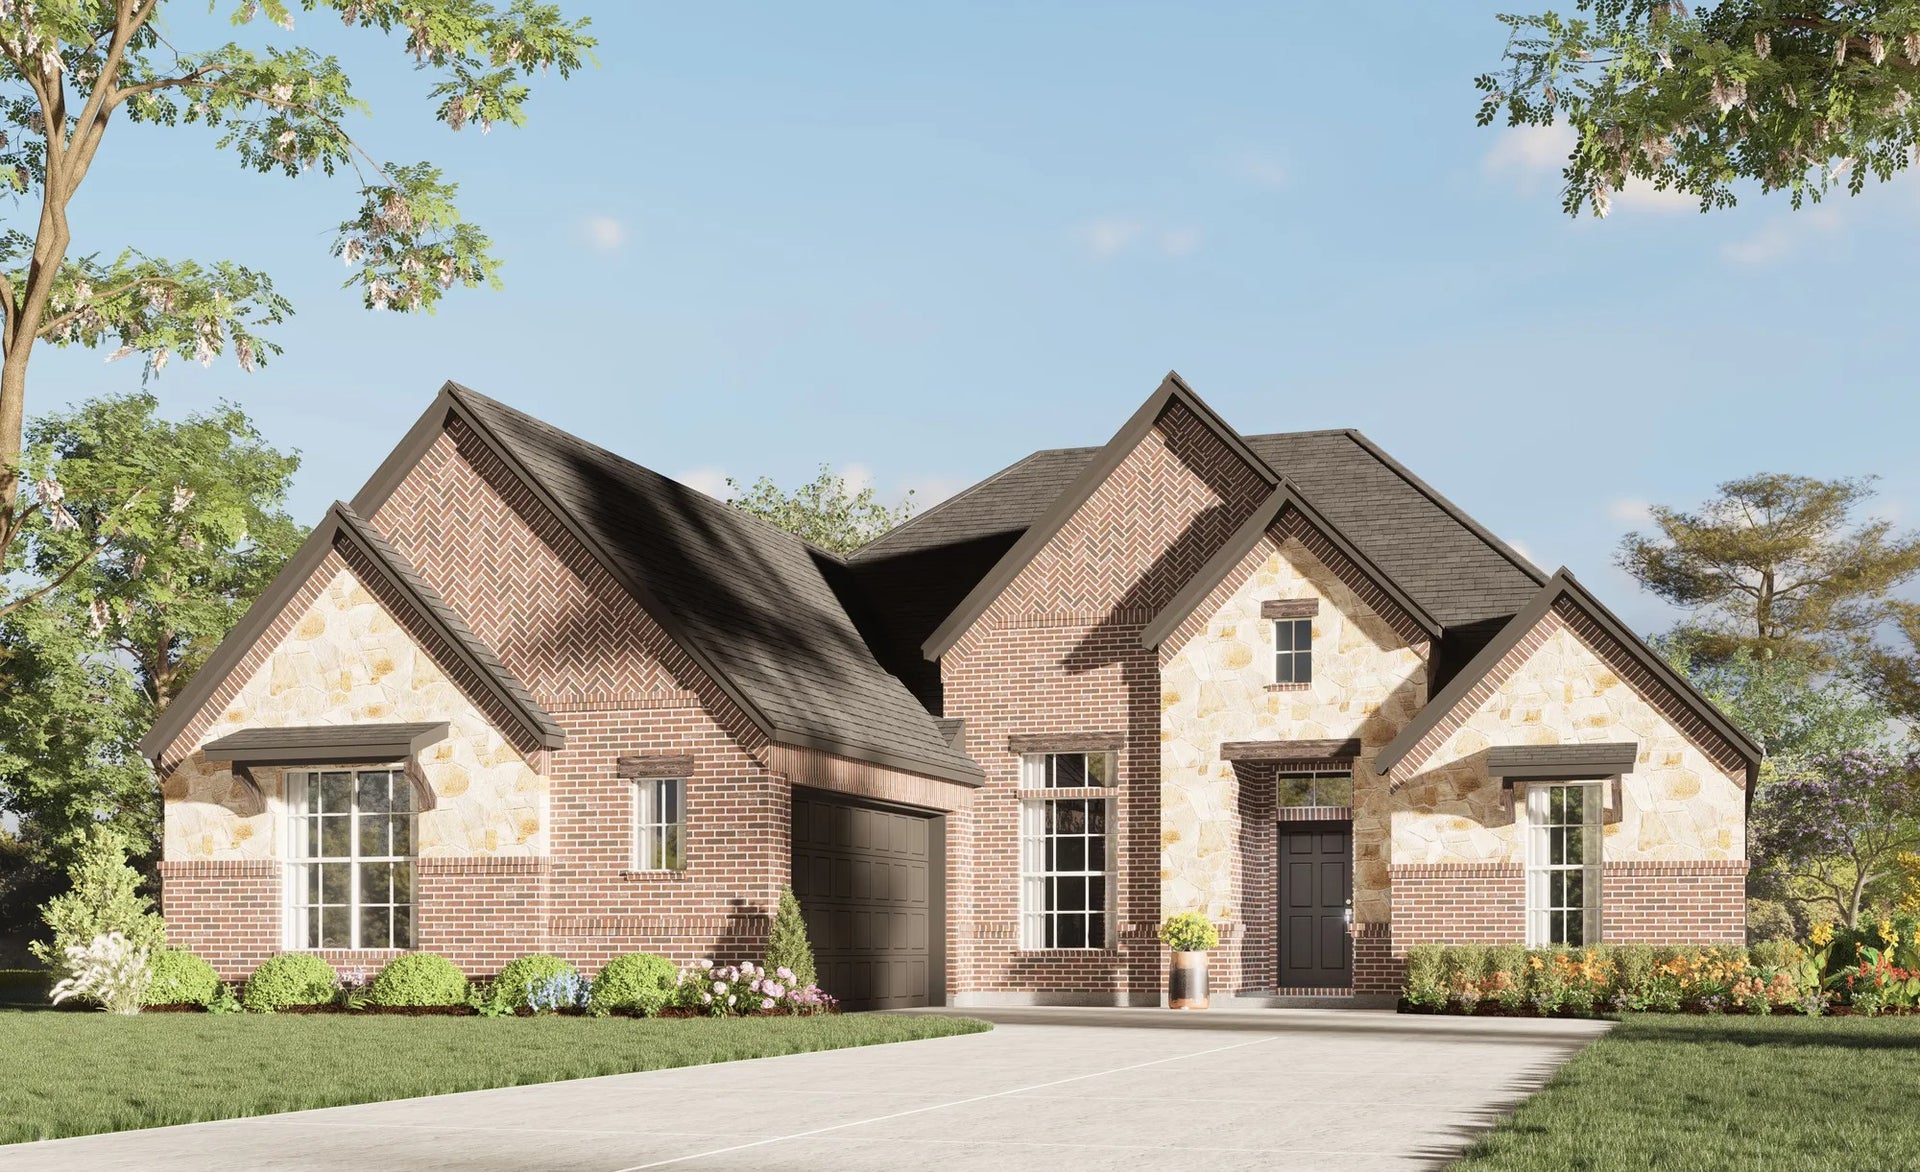 2370 C Stone. 2,370sf New Home in Midlothian, TX